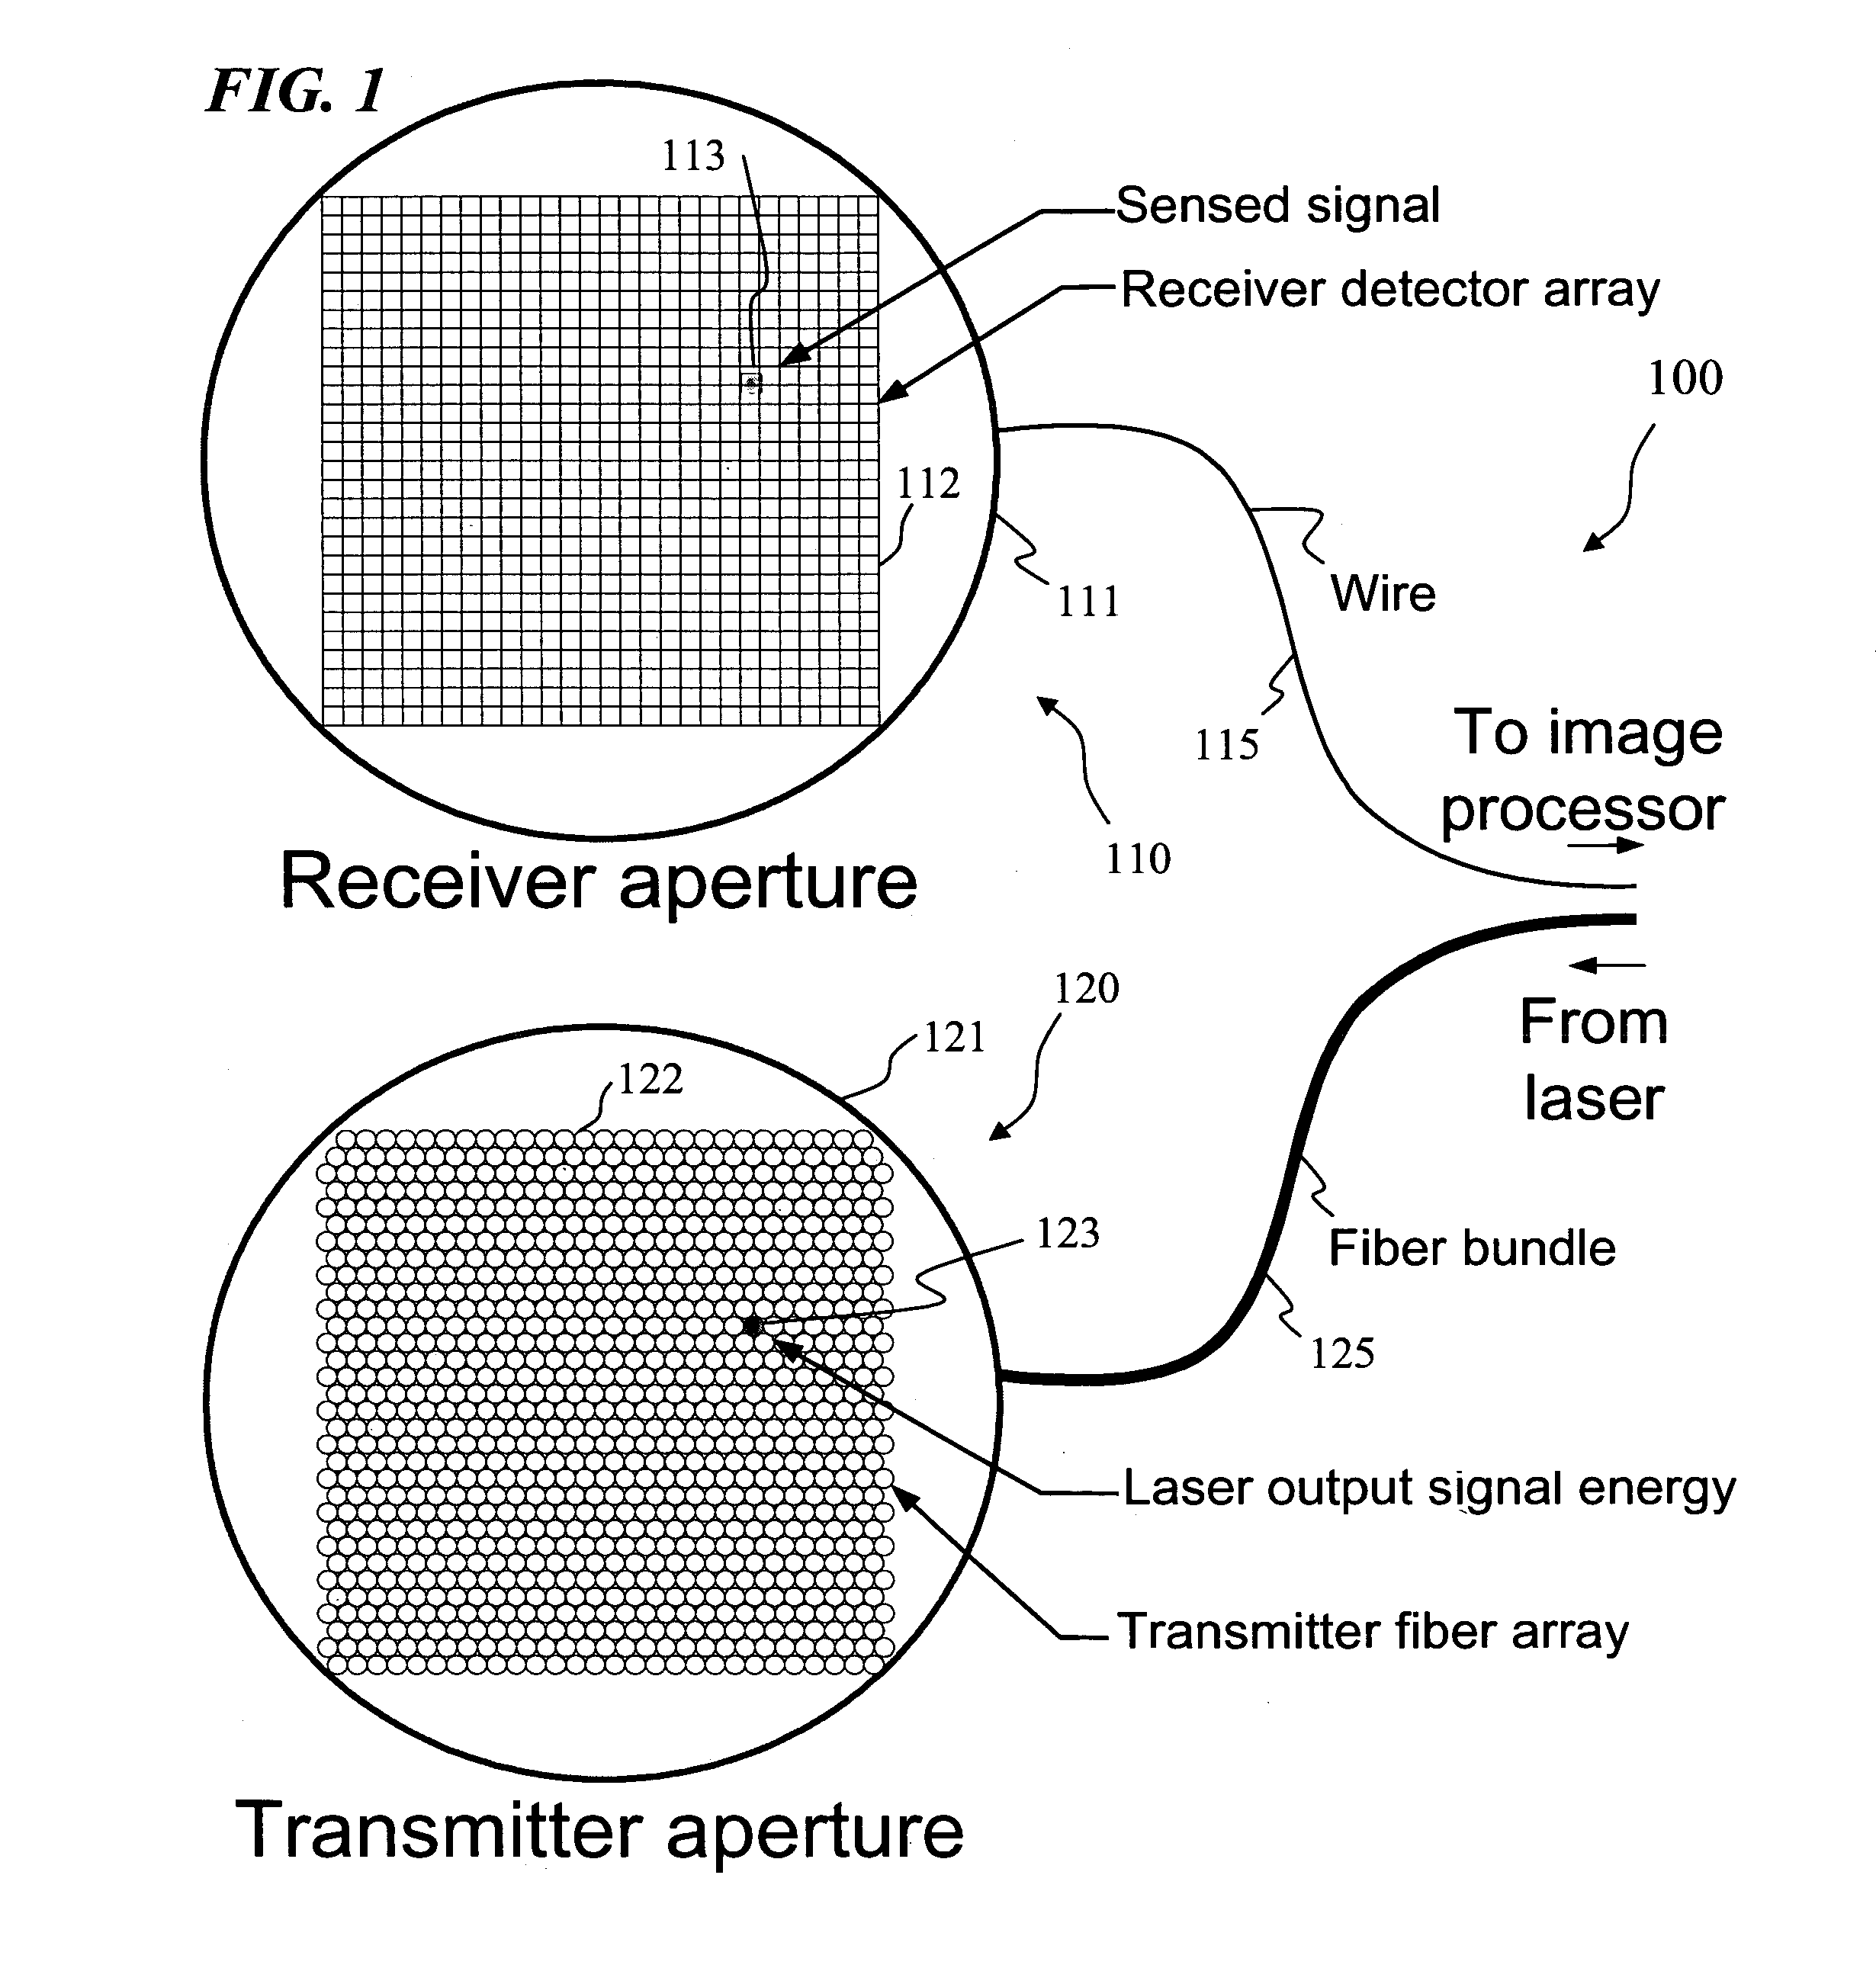 System and method for aircraft infrared countermeasures to missiles